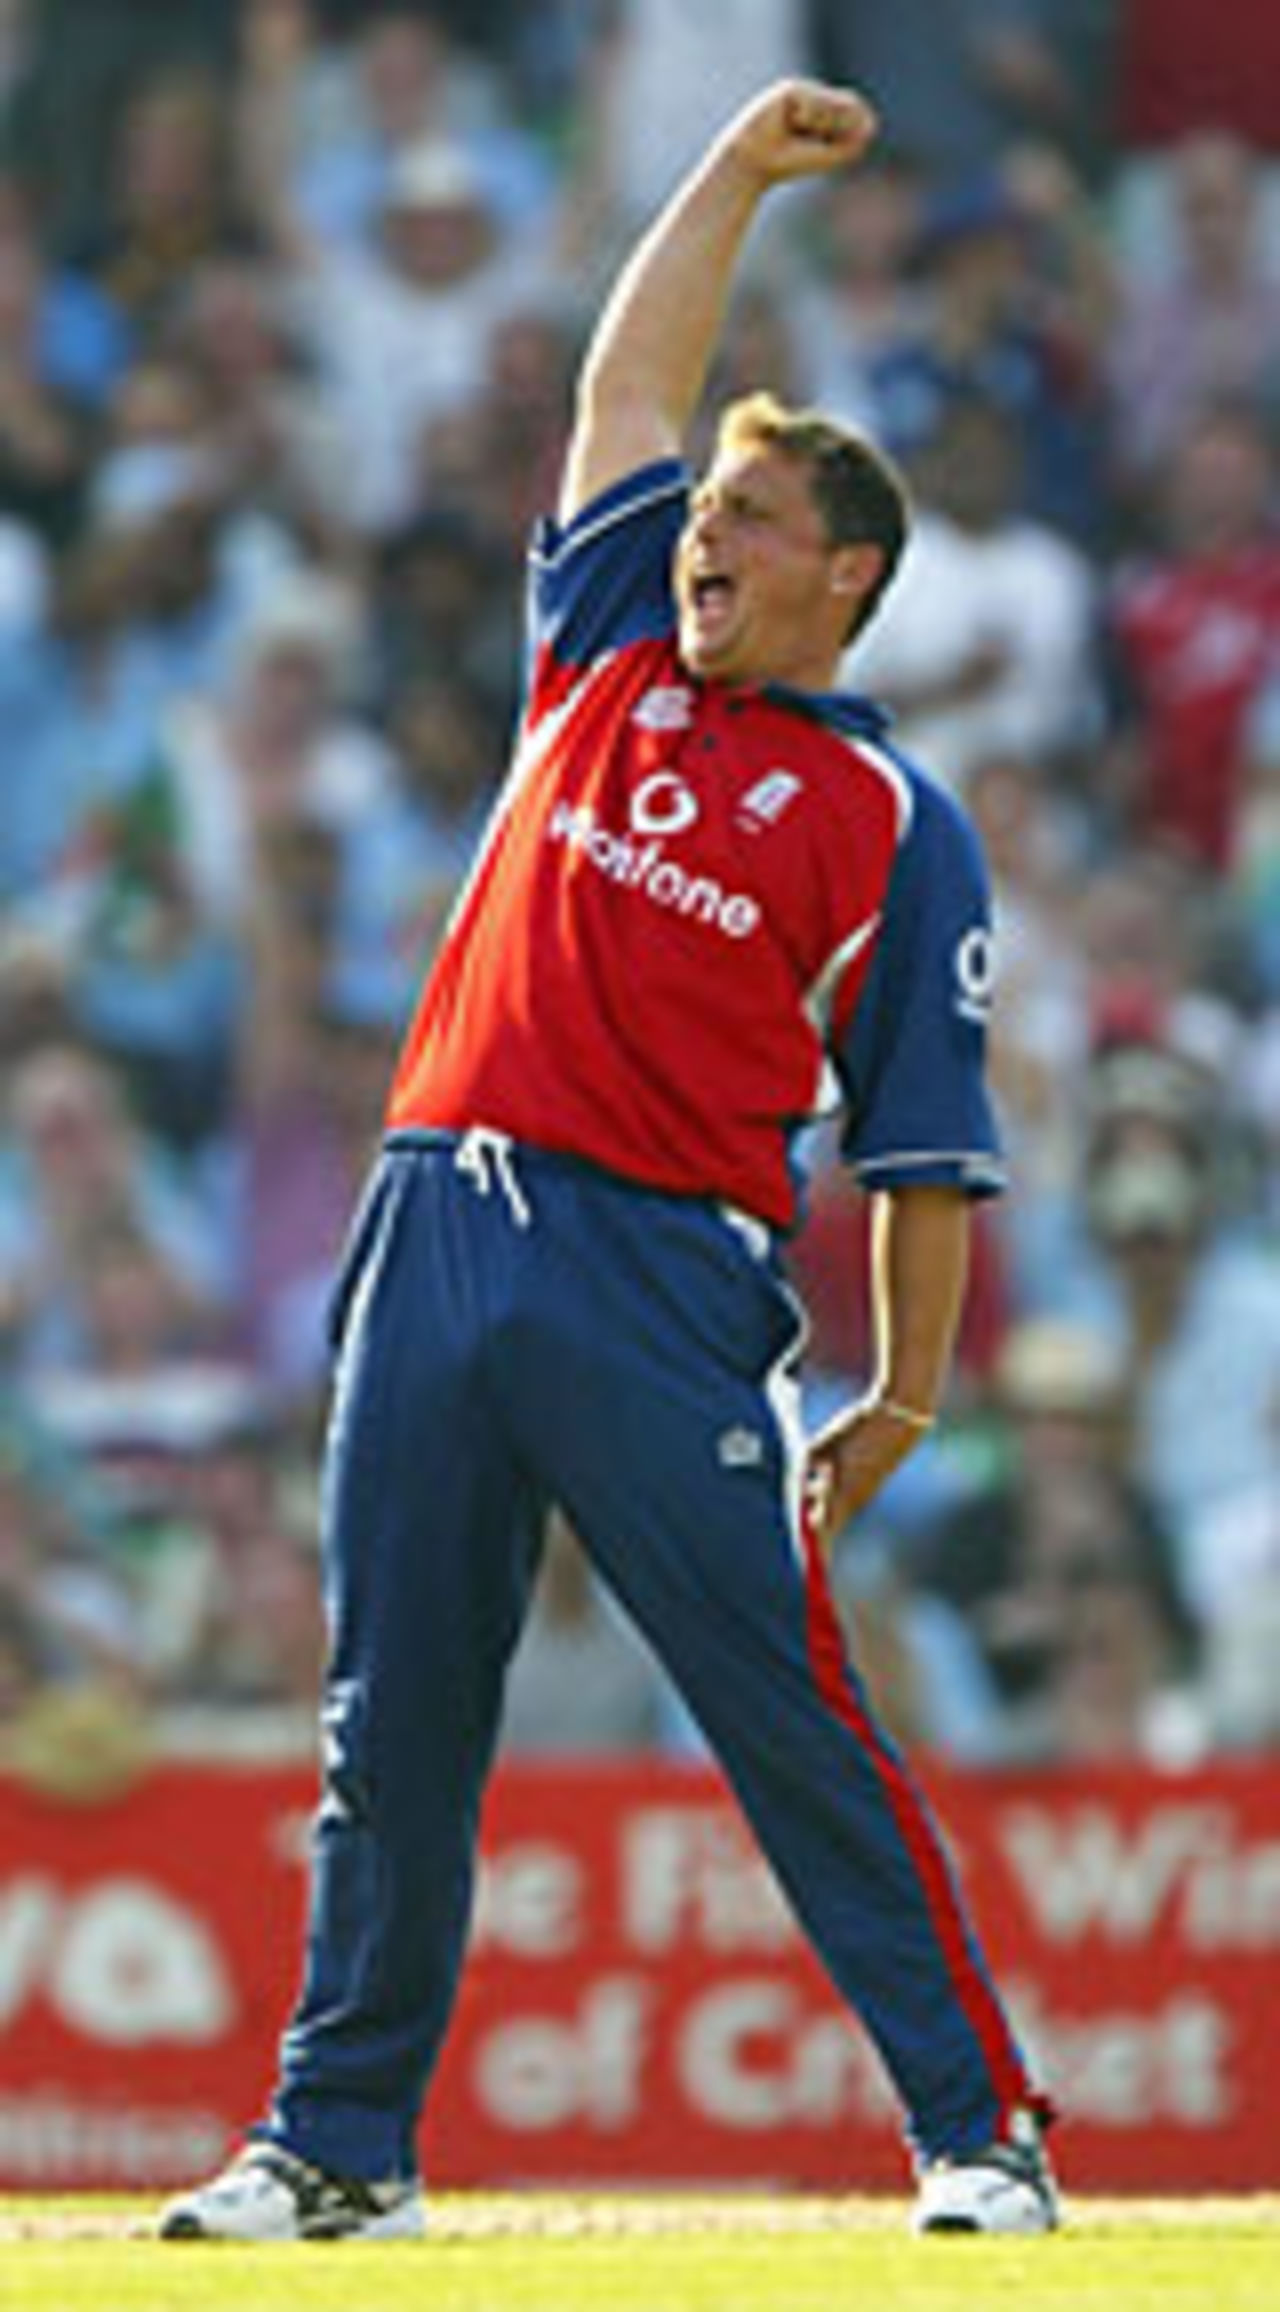 Darren Gough appeals successfully for the wicket of Virender Sehwag, England v India, NatWest Challenge, September 3 2004